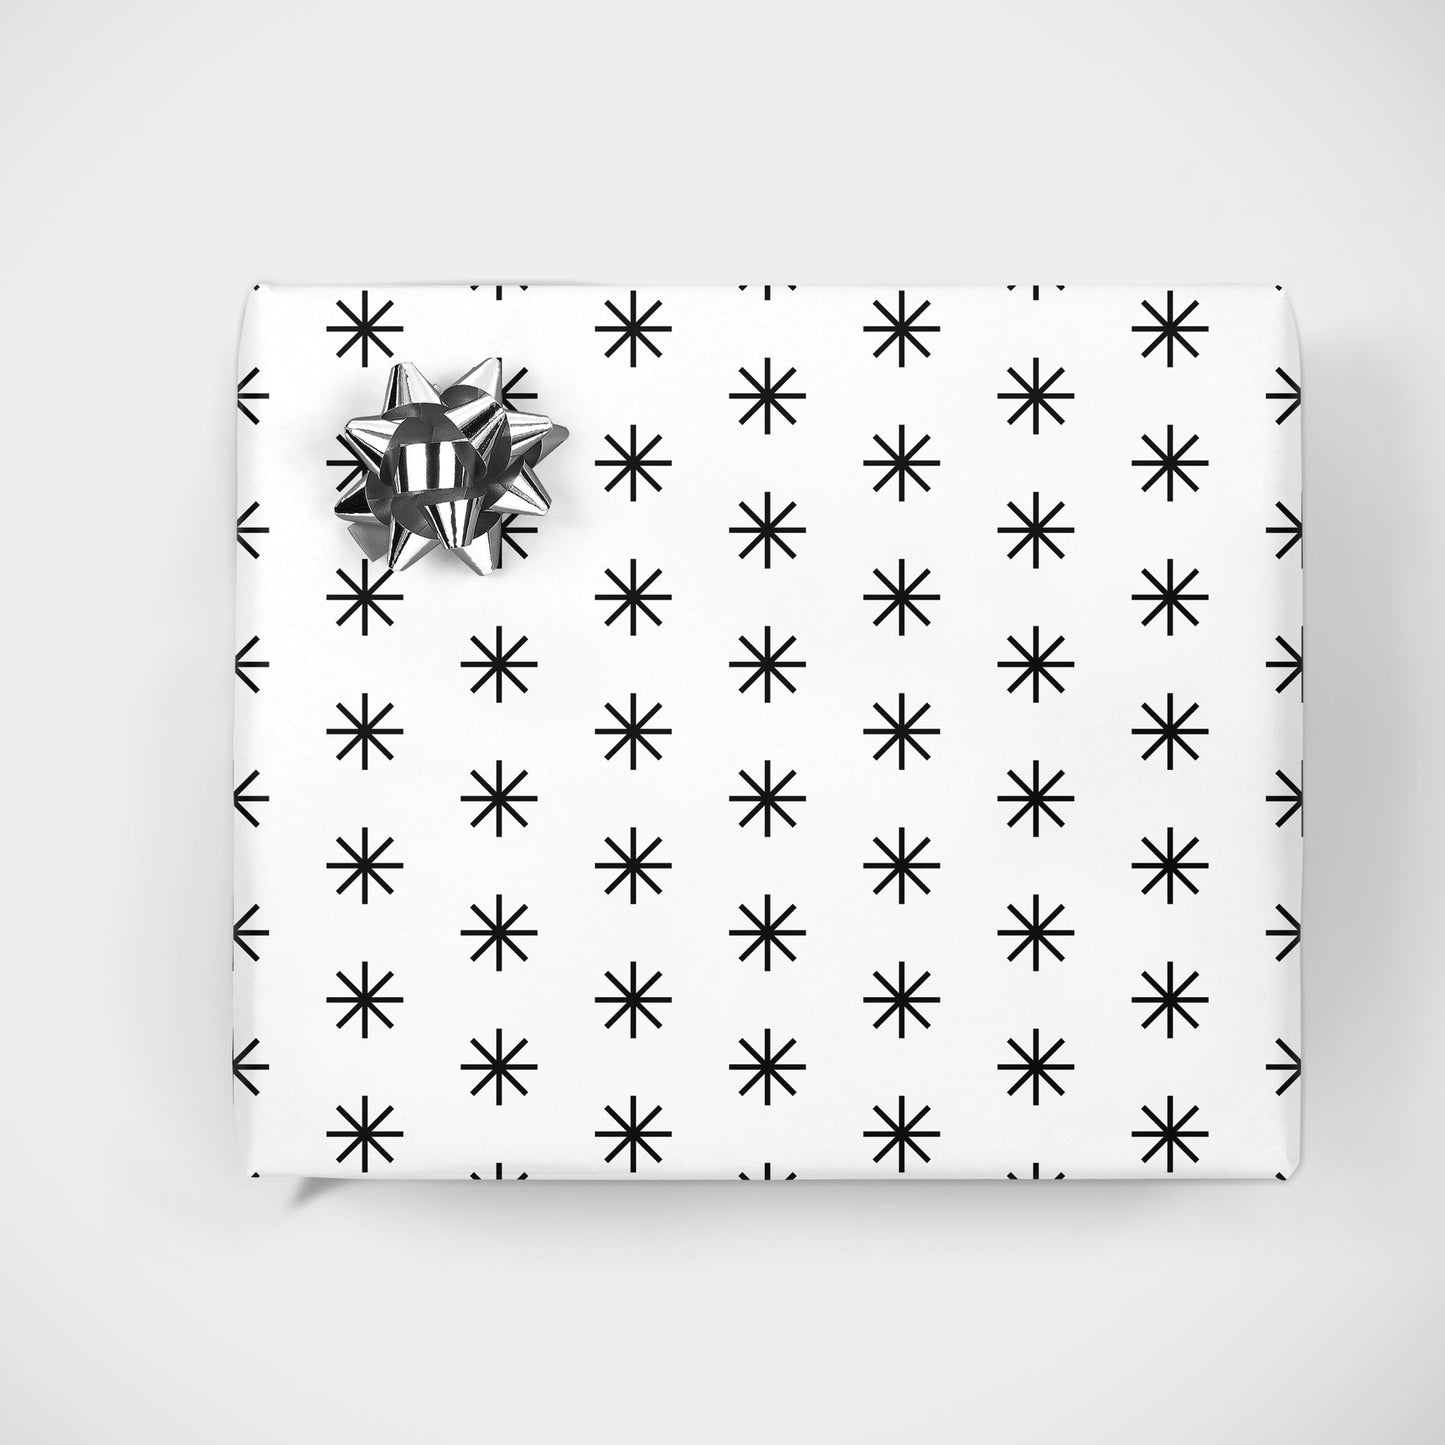 Minimal Star Holiday Black and White Wrapping Paper Sheets The Design Craft